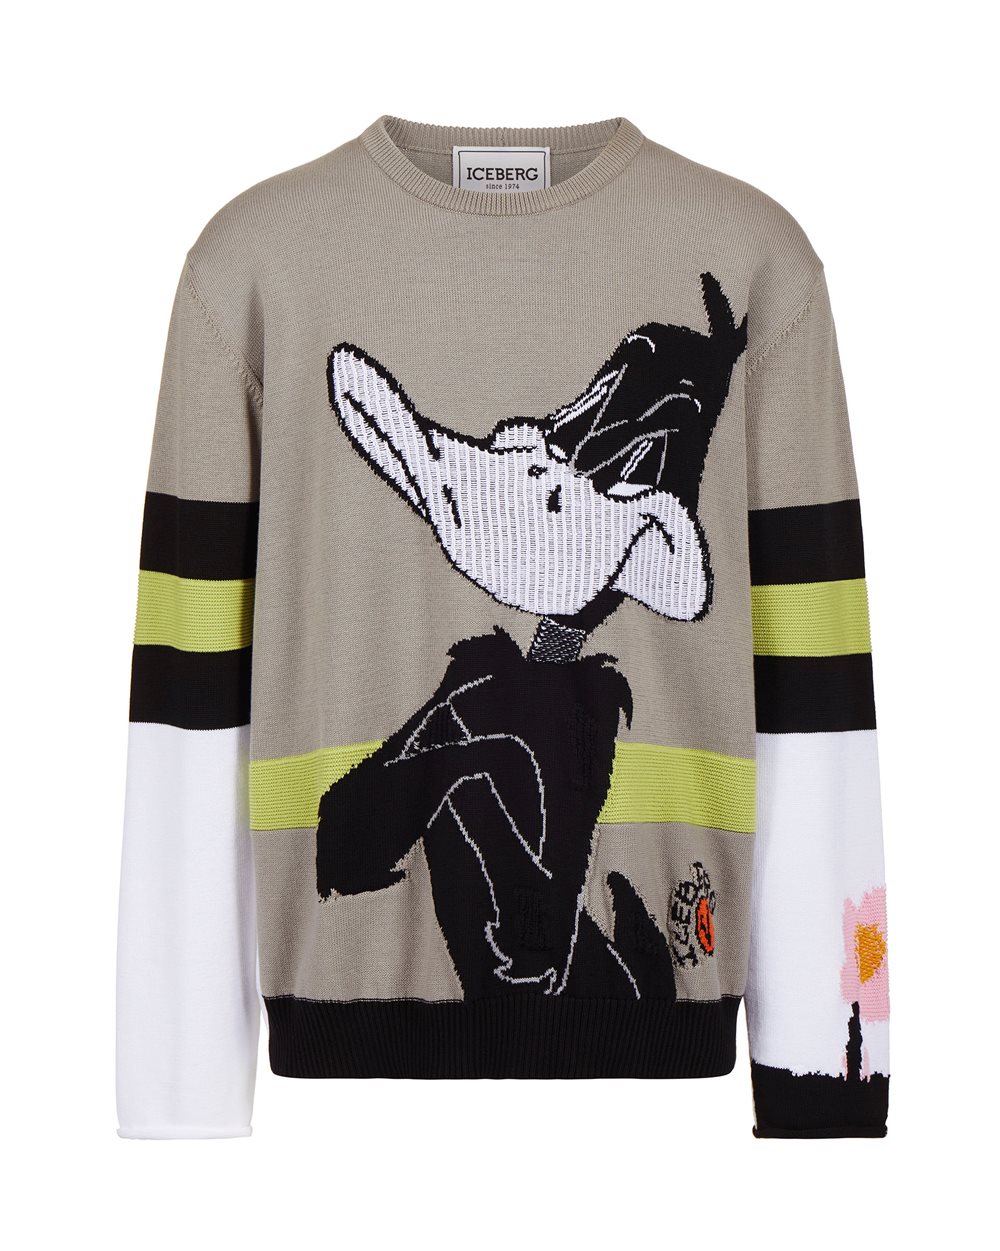 Sweater with cartoon graphics and logo - Man | Iceberg - Official Website